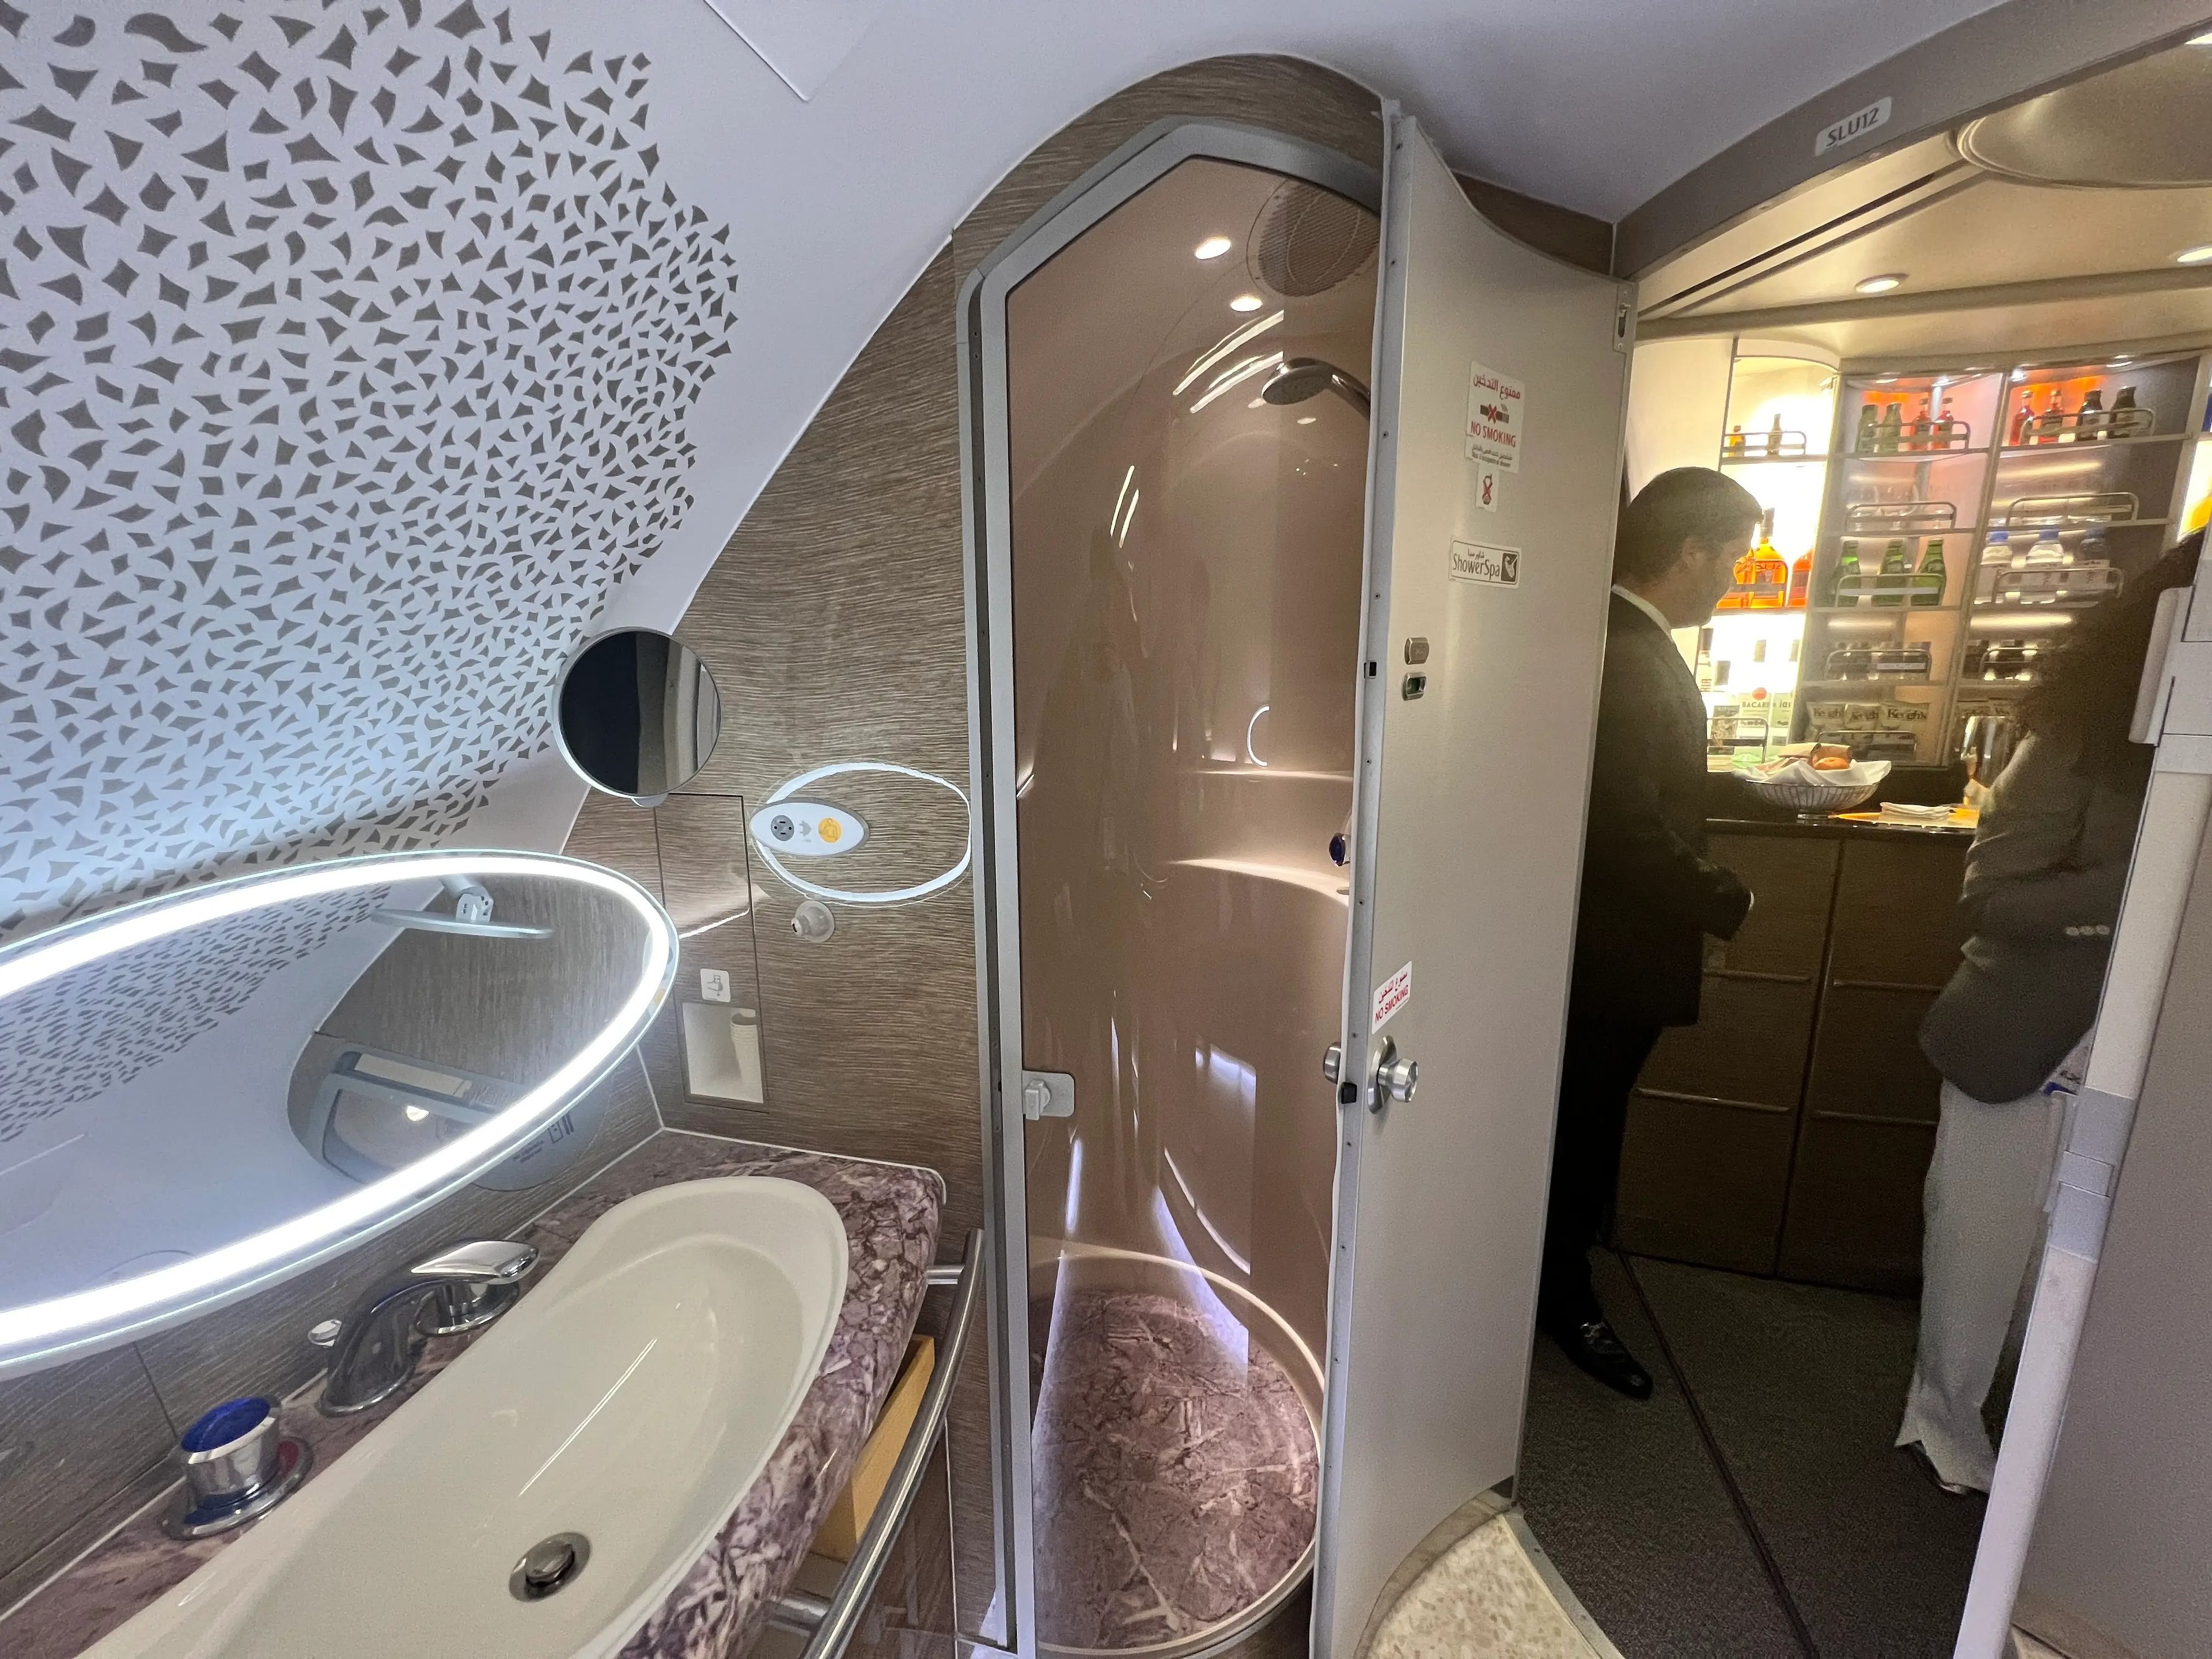 The private shower spa onboard an Emirates a380, with shower in the corner, sink to the left, and open door showing another small bar.